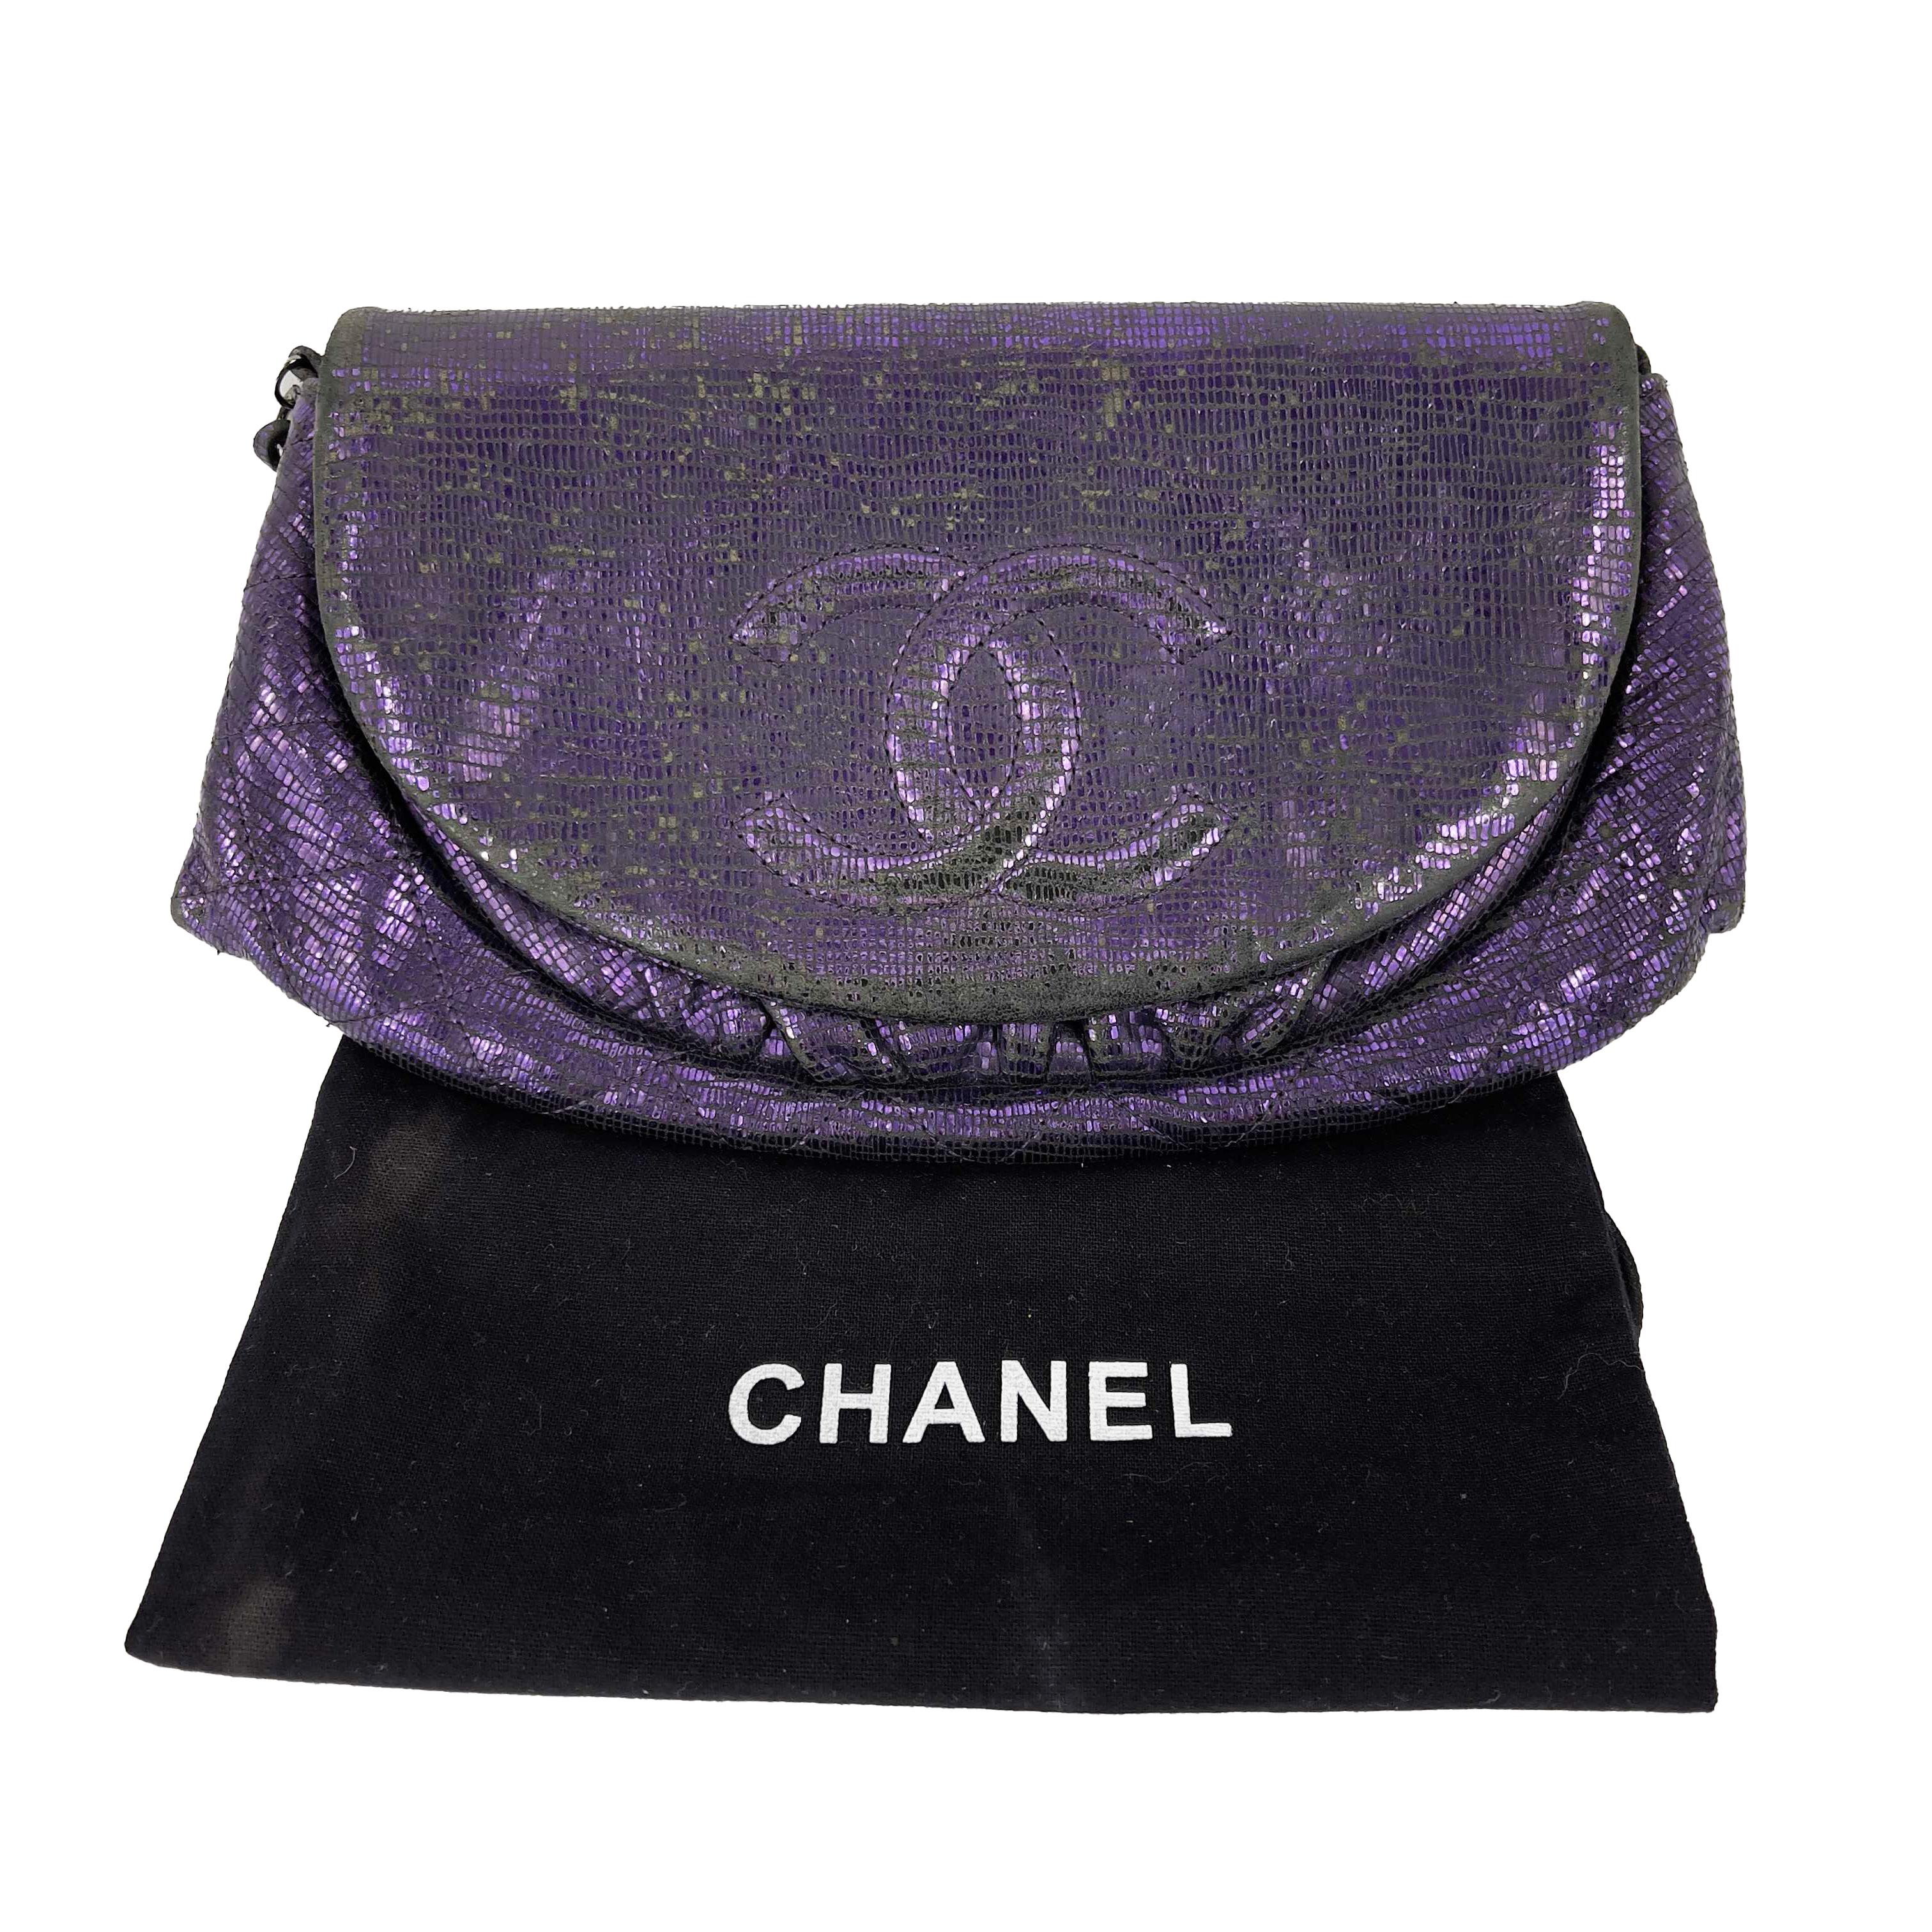 CHANEL- Half Moon Wallet on Chain Iridescent Purple Leather / Silver Crossbody In Fair Condition For Sale In Sanford, FL